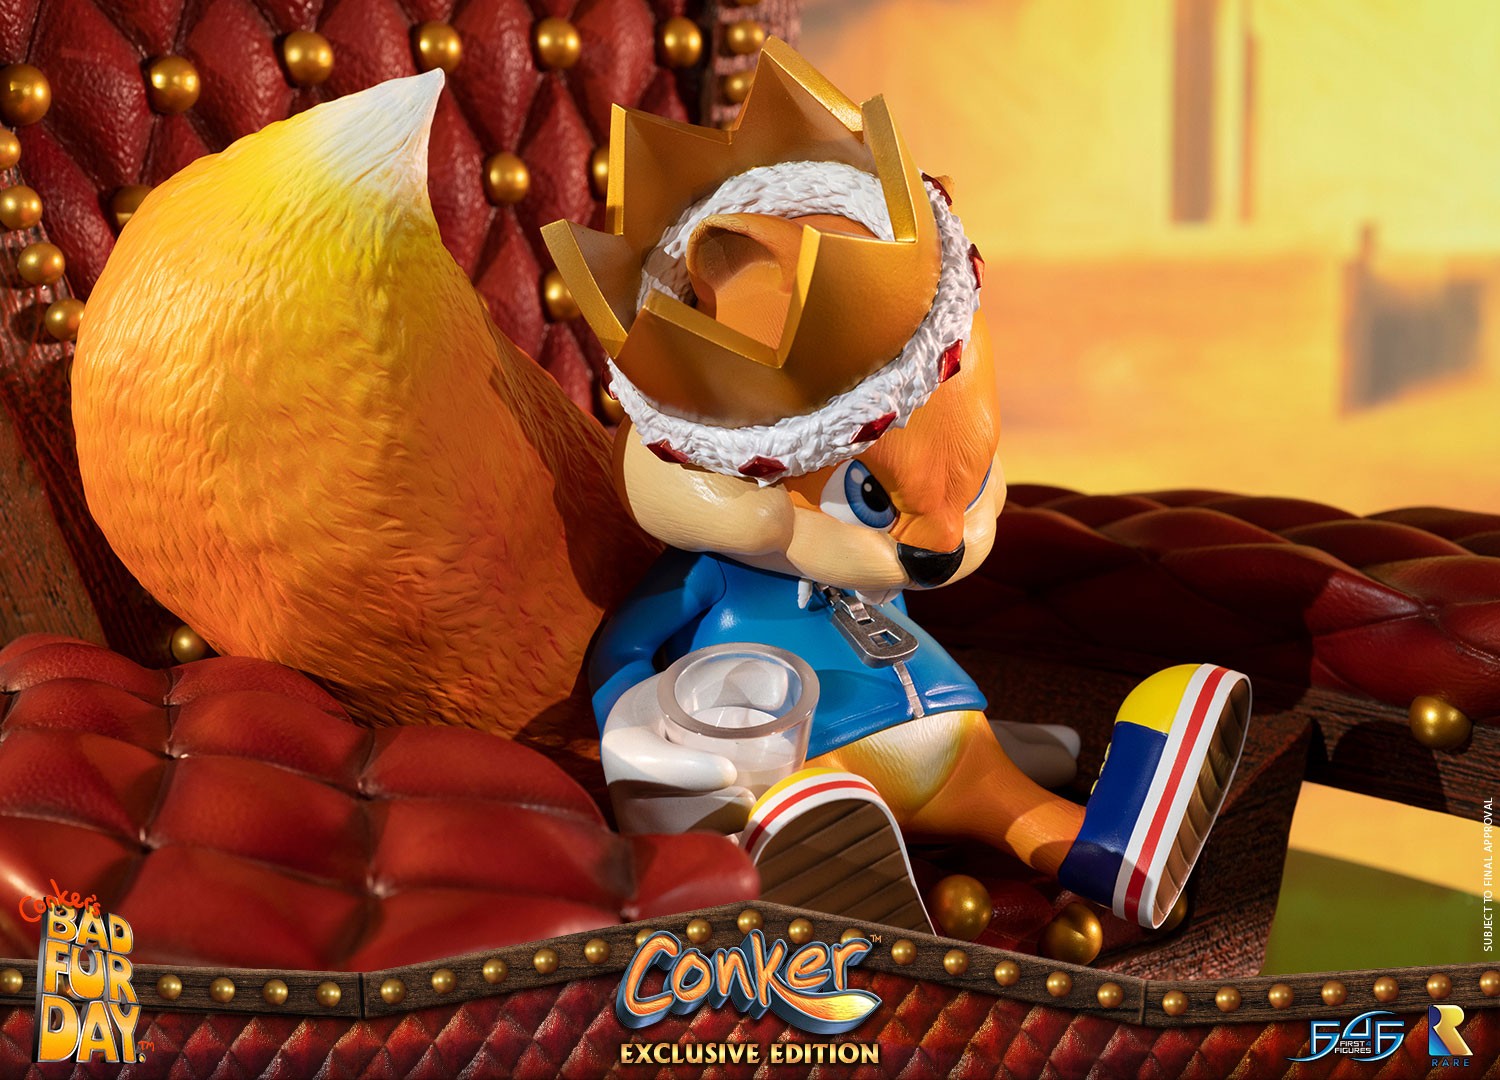 conker first 4 figures